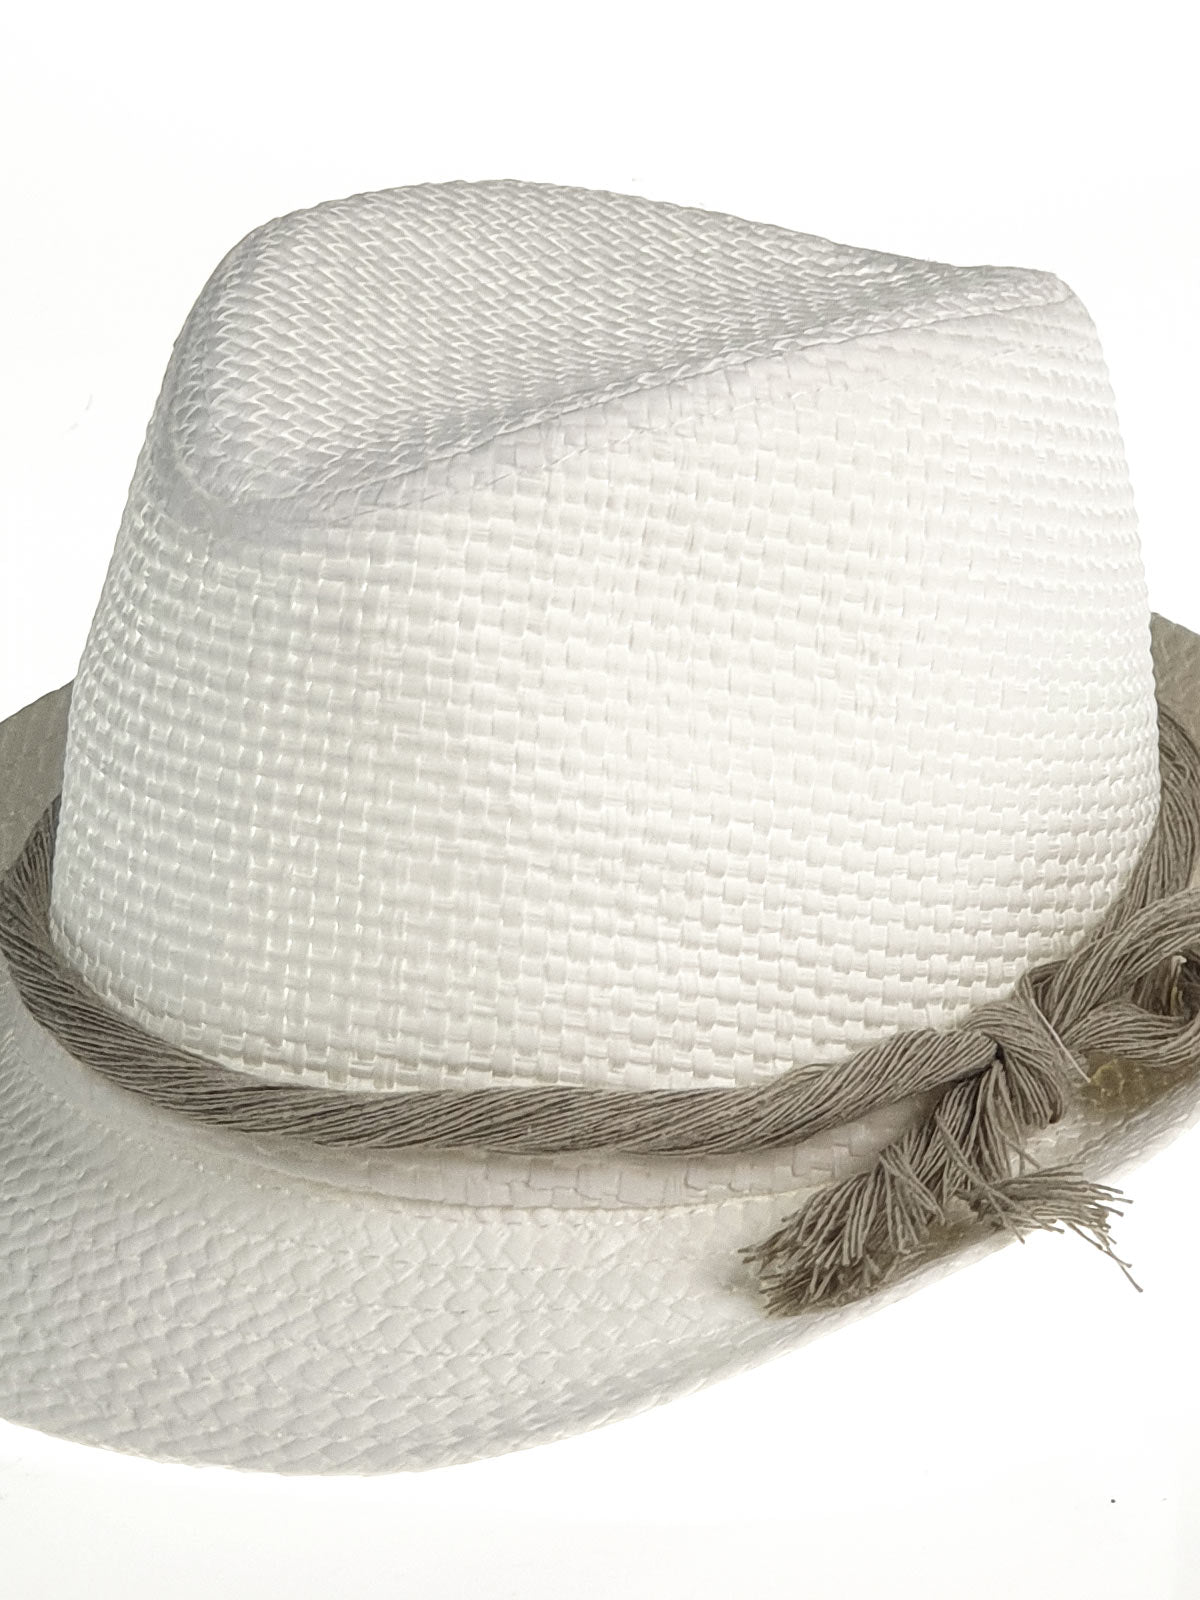 Boy's Hat with natural rope - ARMEL